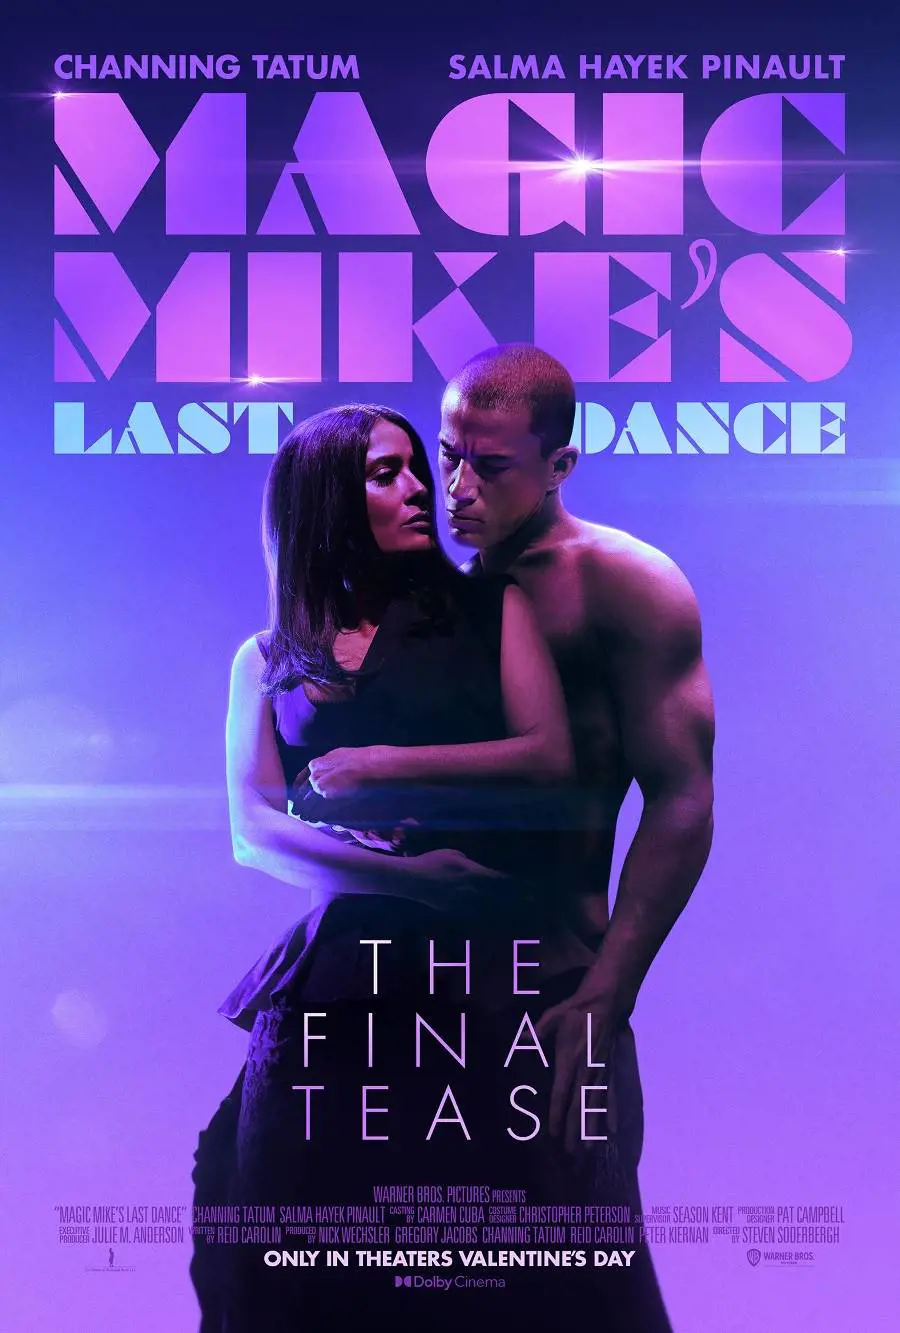 Magic Mike's Last Dance is set to be released in the US on February 10, 2023, by Warner Bros